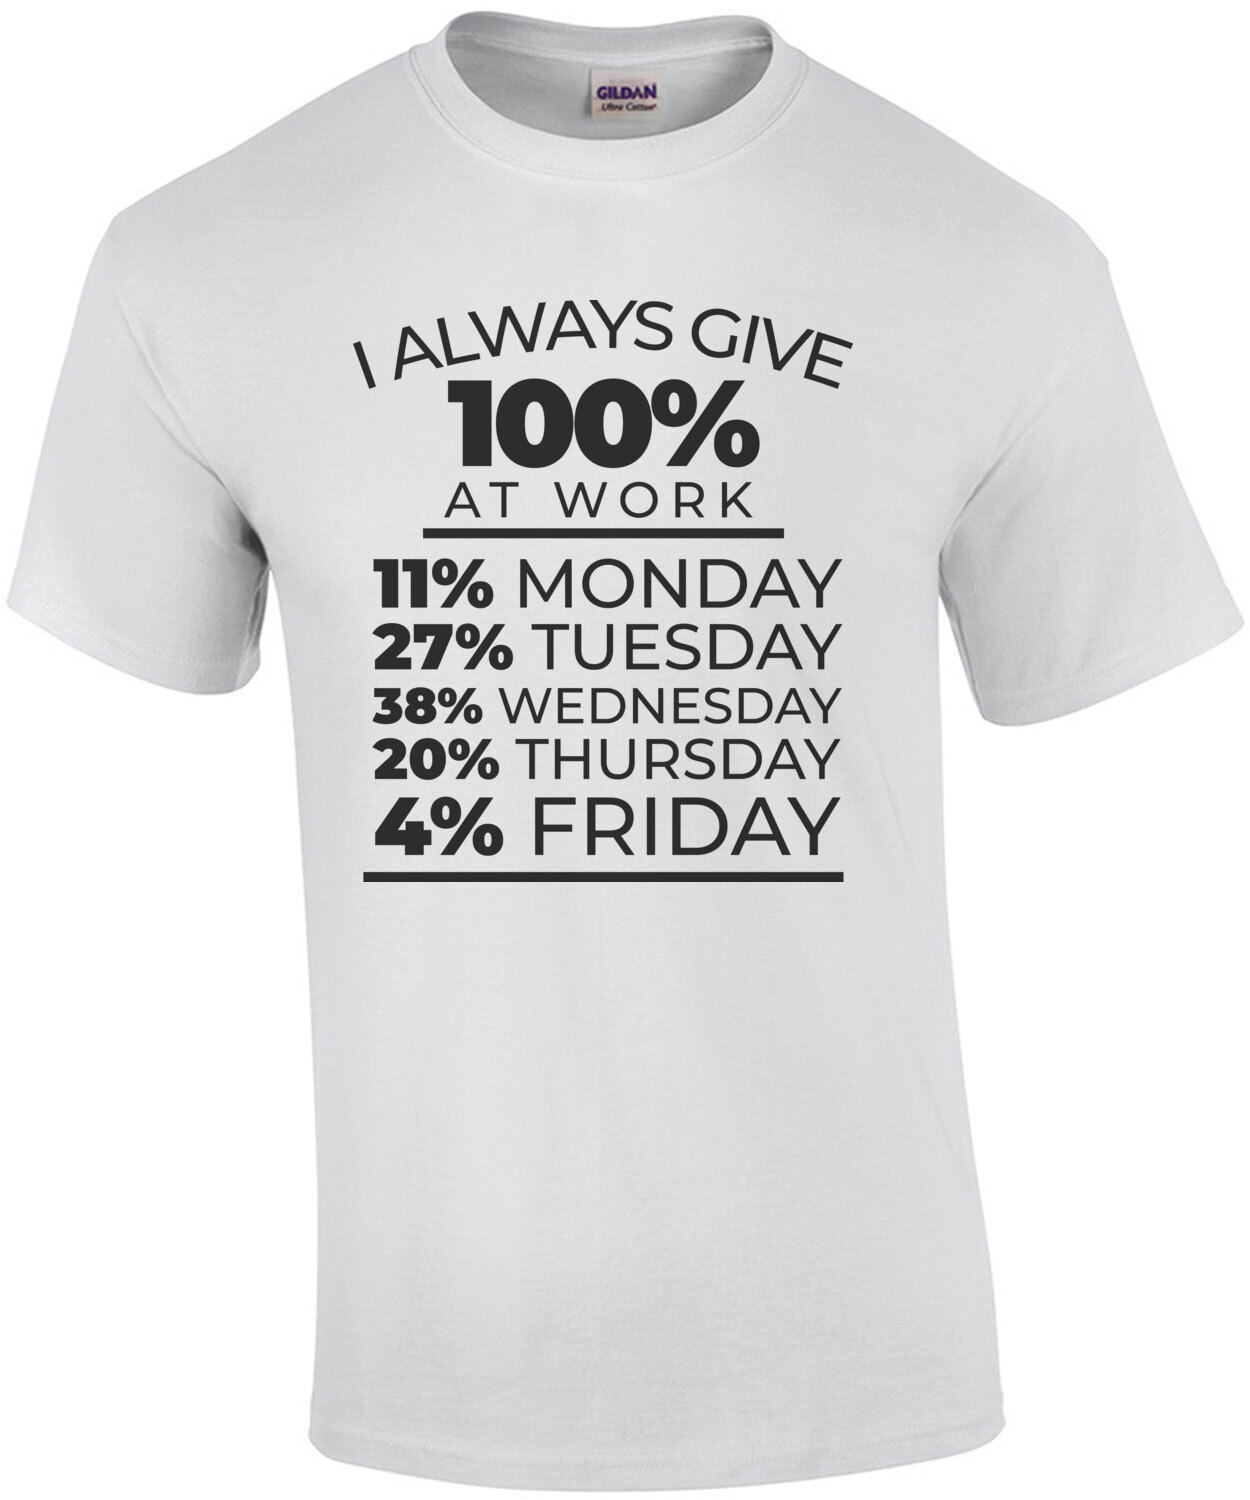 Always Give 100% at Work T-shirt Funny Shirts